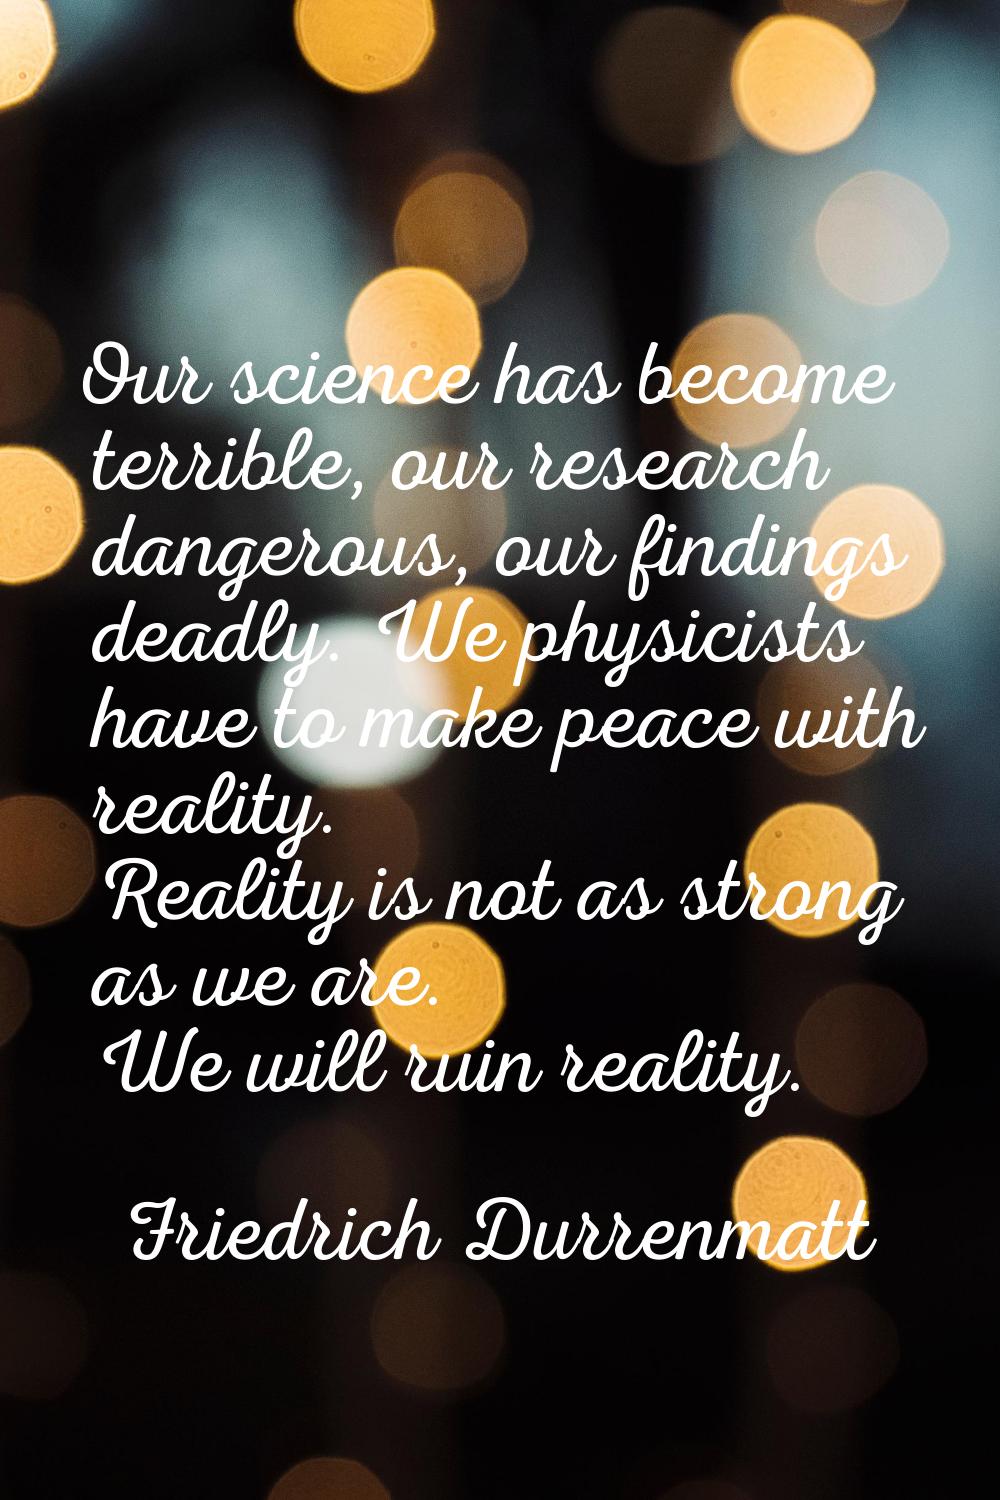 Our science has become terrible, our research dangerous, our findings deadly. We physicists have to